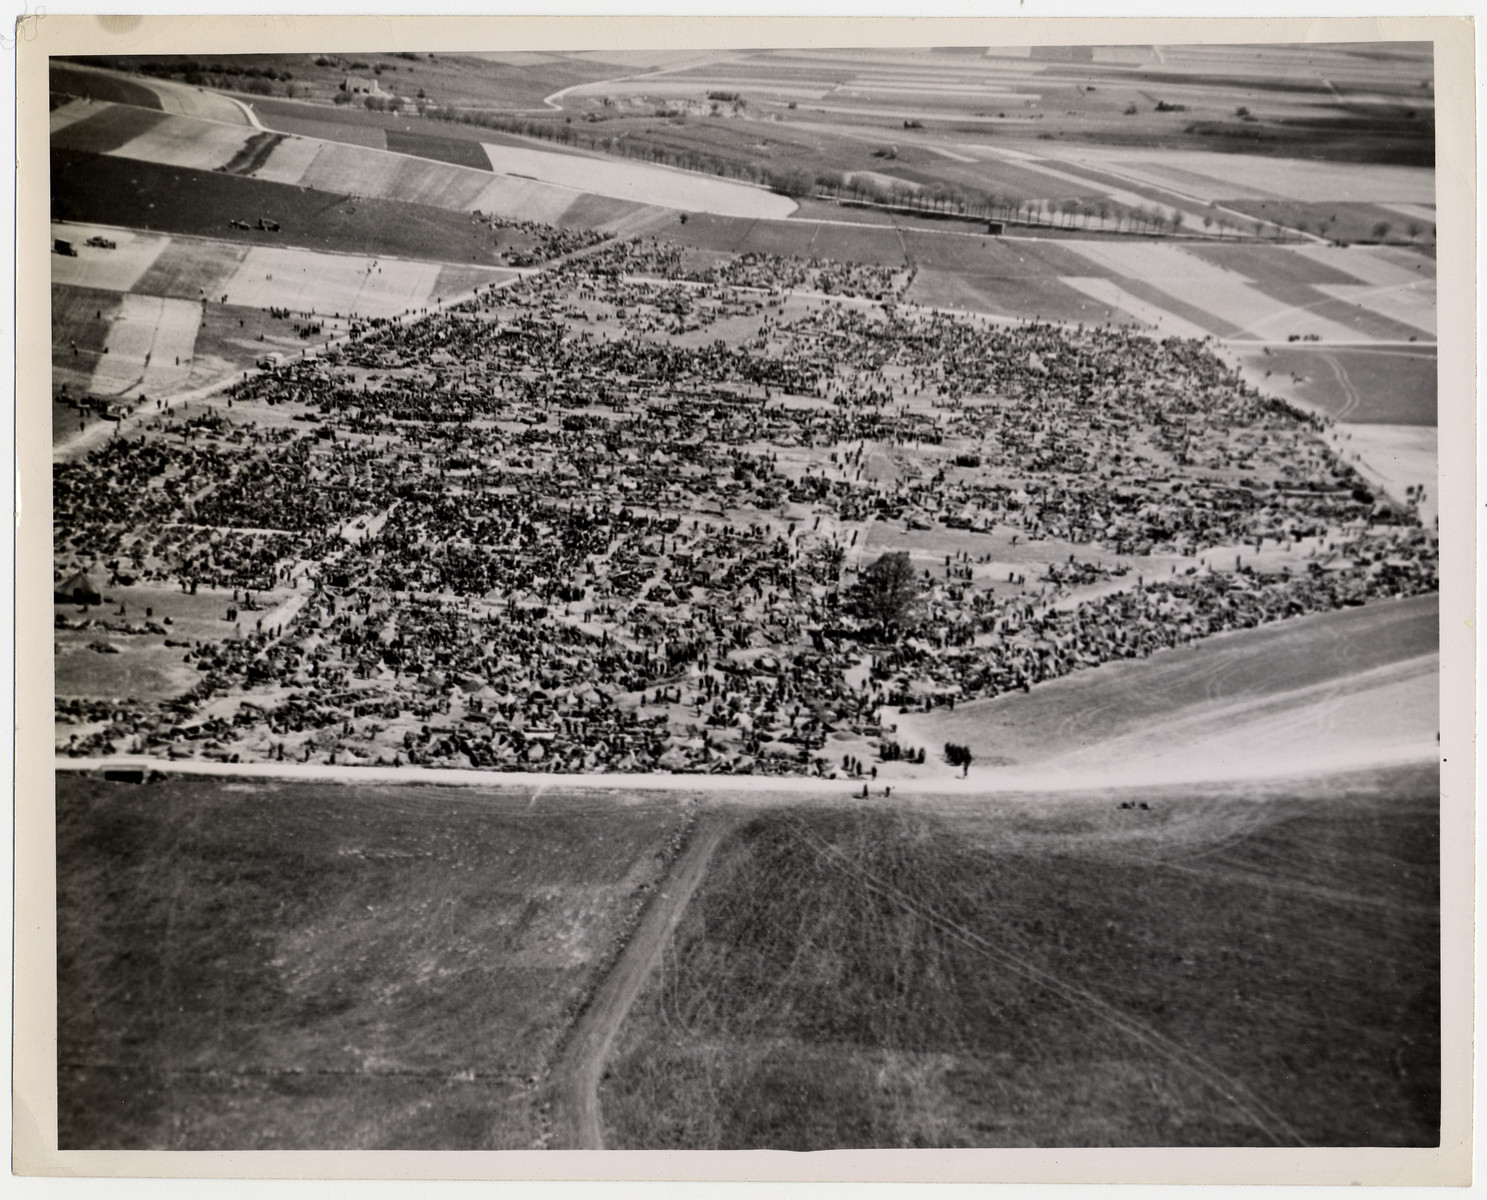 Aerial photograph of an American Army prisoner-of-war camp in Brilon, Germany.

Original caption reads: "The camp, 75 miles northeast of the Rhine River city of Cologne, holds some of the 316,930 Nazi troops captured in the Ruhr pocket by American forces. It was announced April 22 that a total of 2,260,156 prisoners had been taken by the Allies on the Western Front since "D-Day" (June 6, 1944)."

U.S. Signal Corps photo ETO-HQ-45-33419